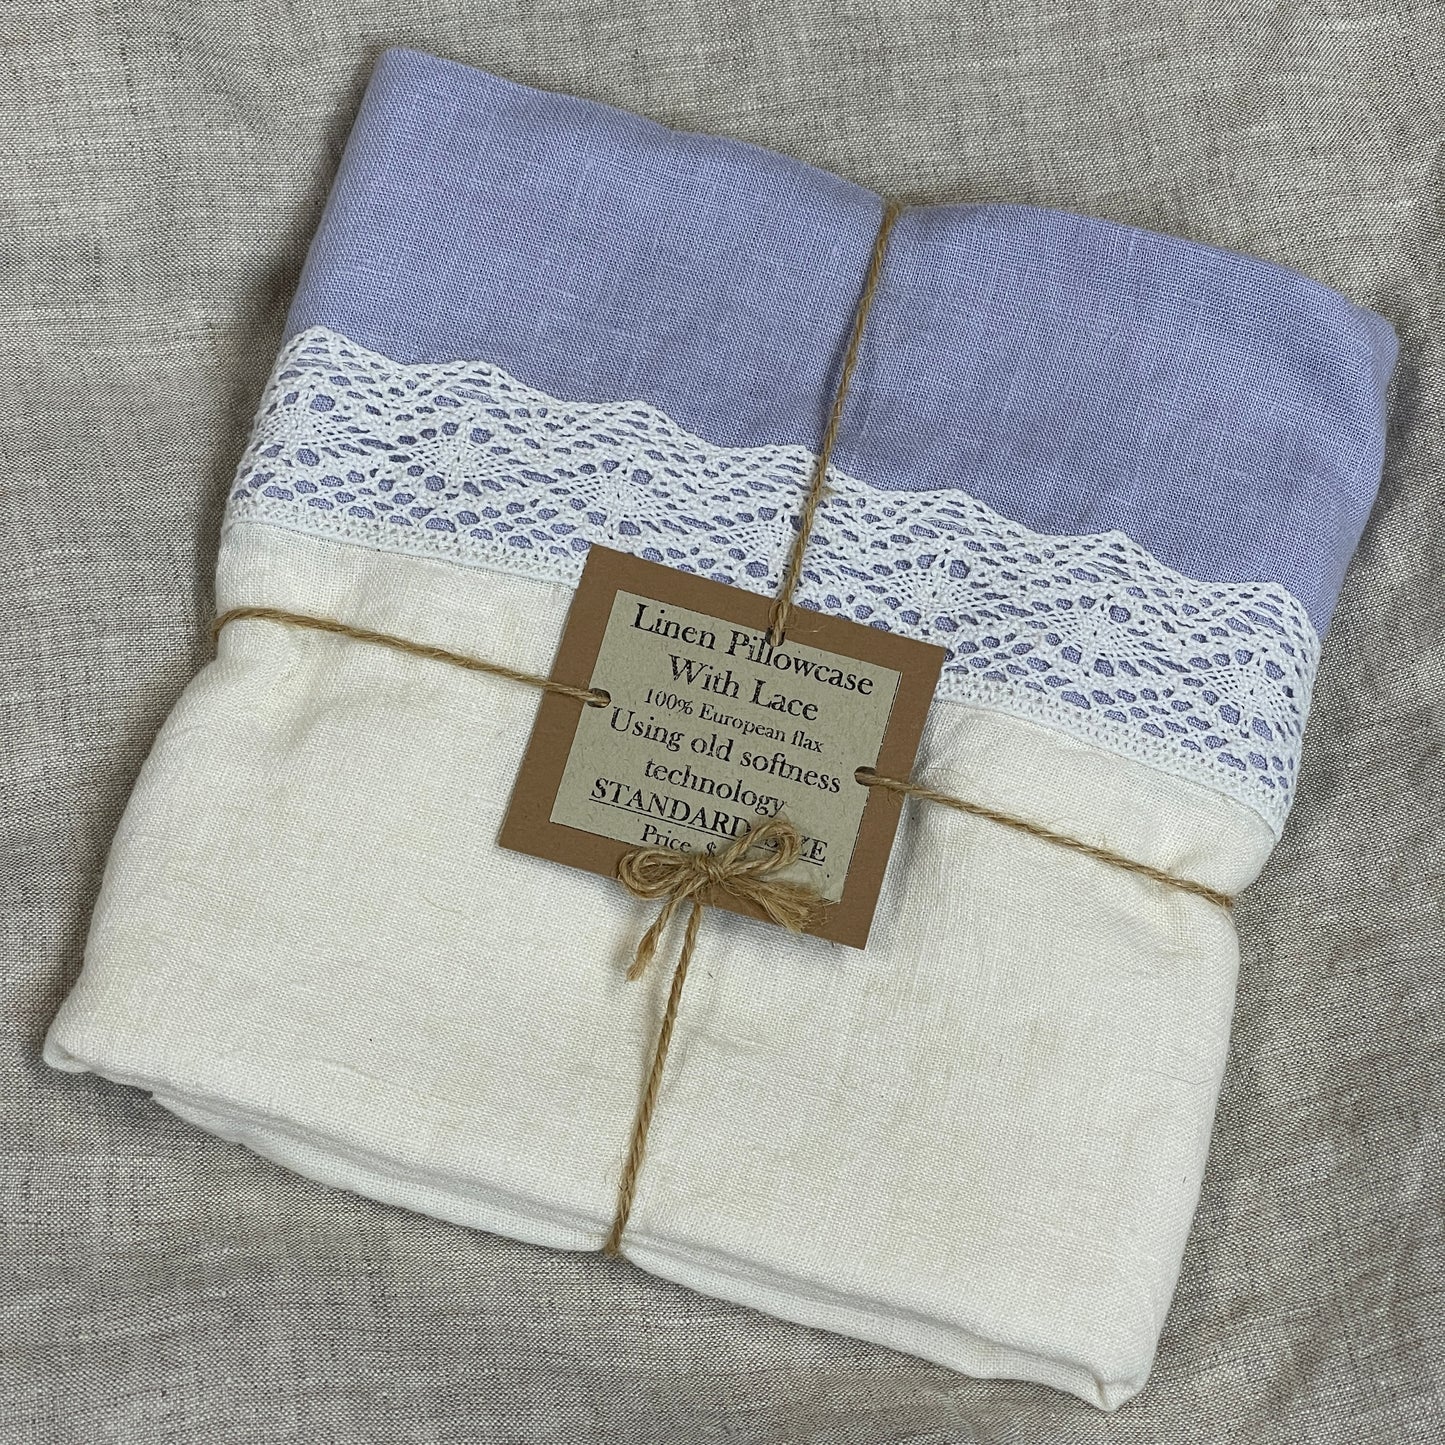 Off-white Silver Lilas Flax Pillowcase with Lace